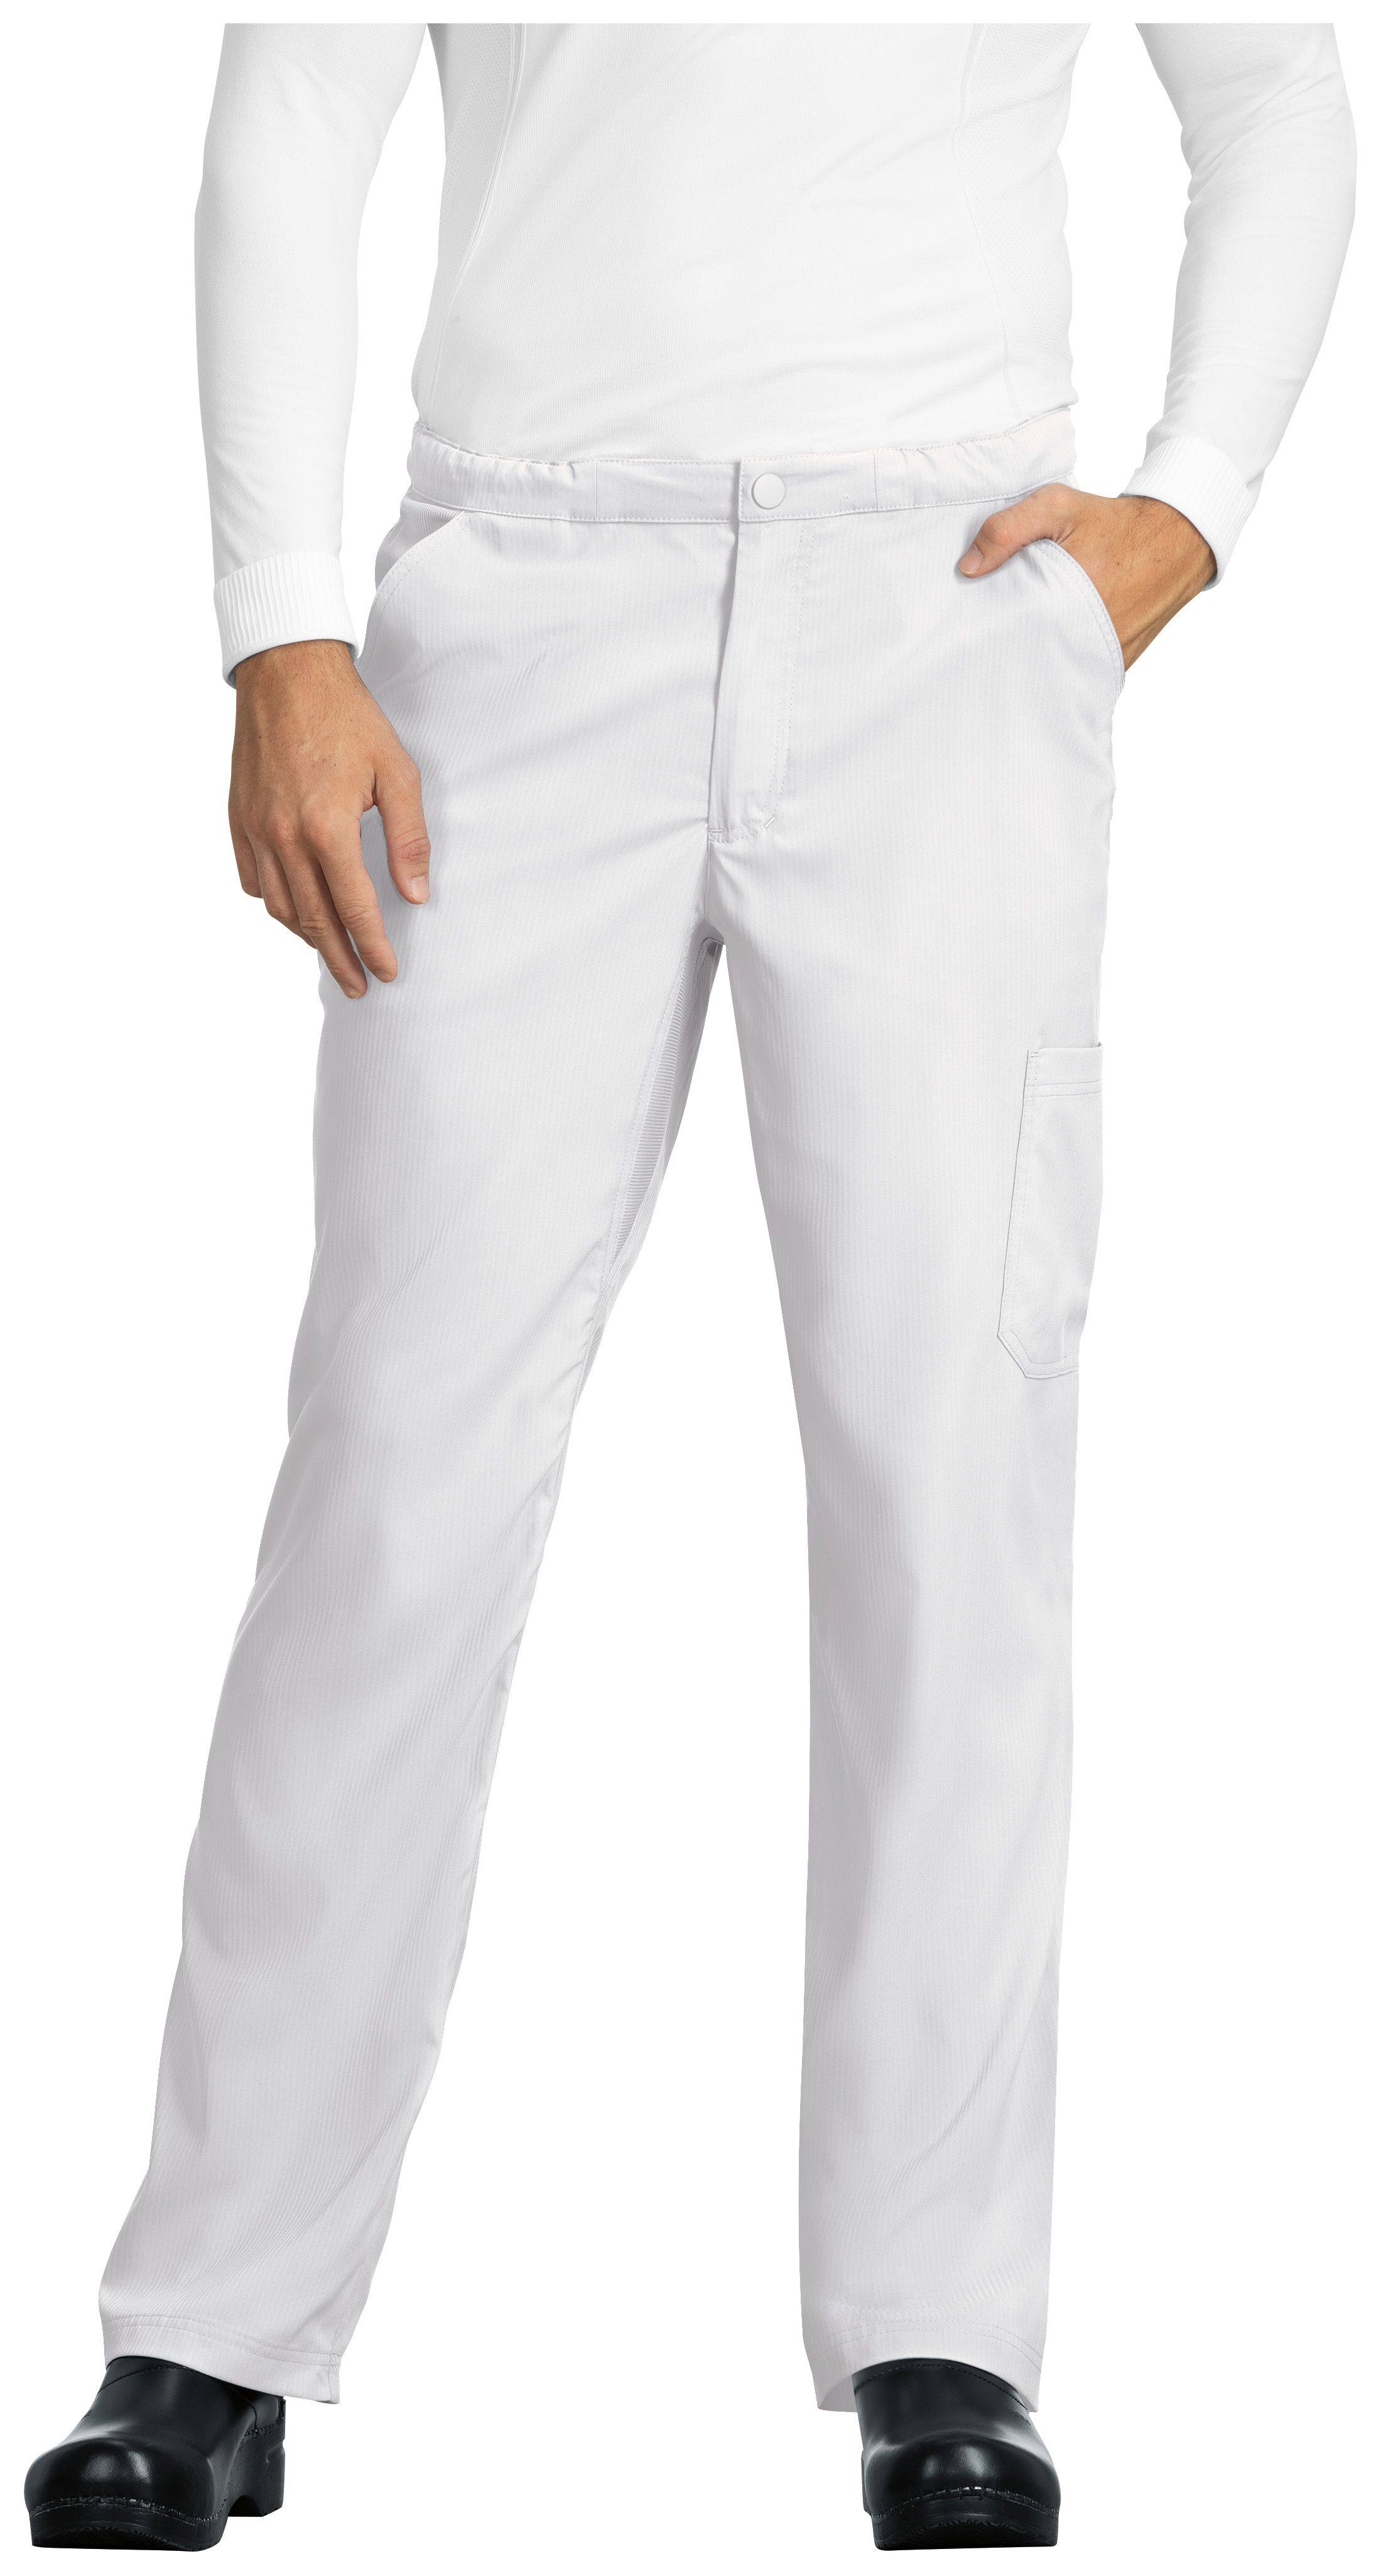 Buy Discovery Pant - KOI Online at Best price - NH